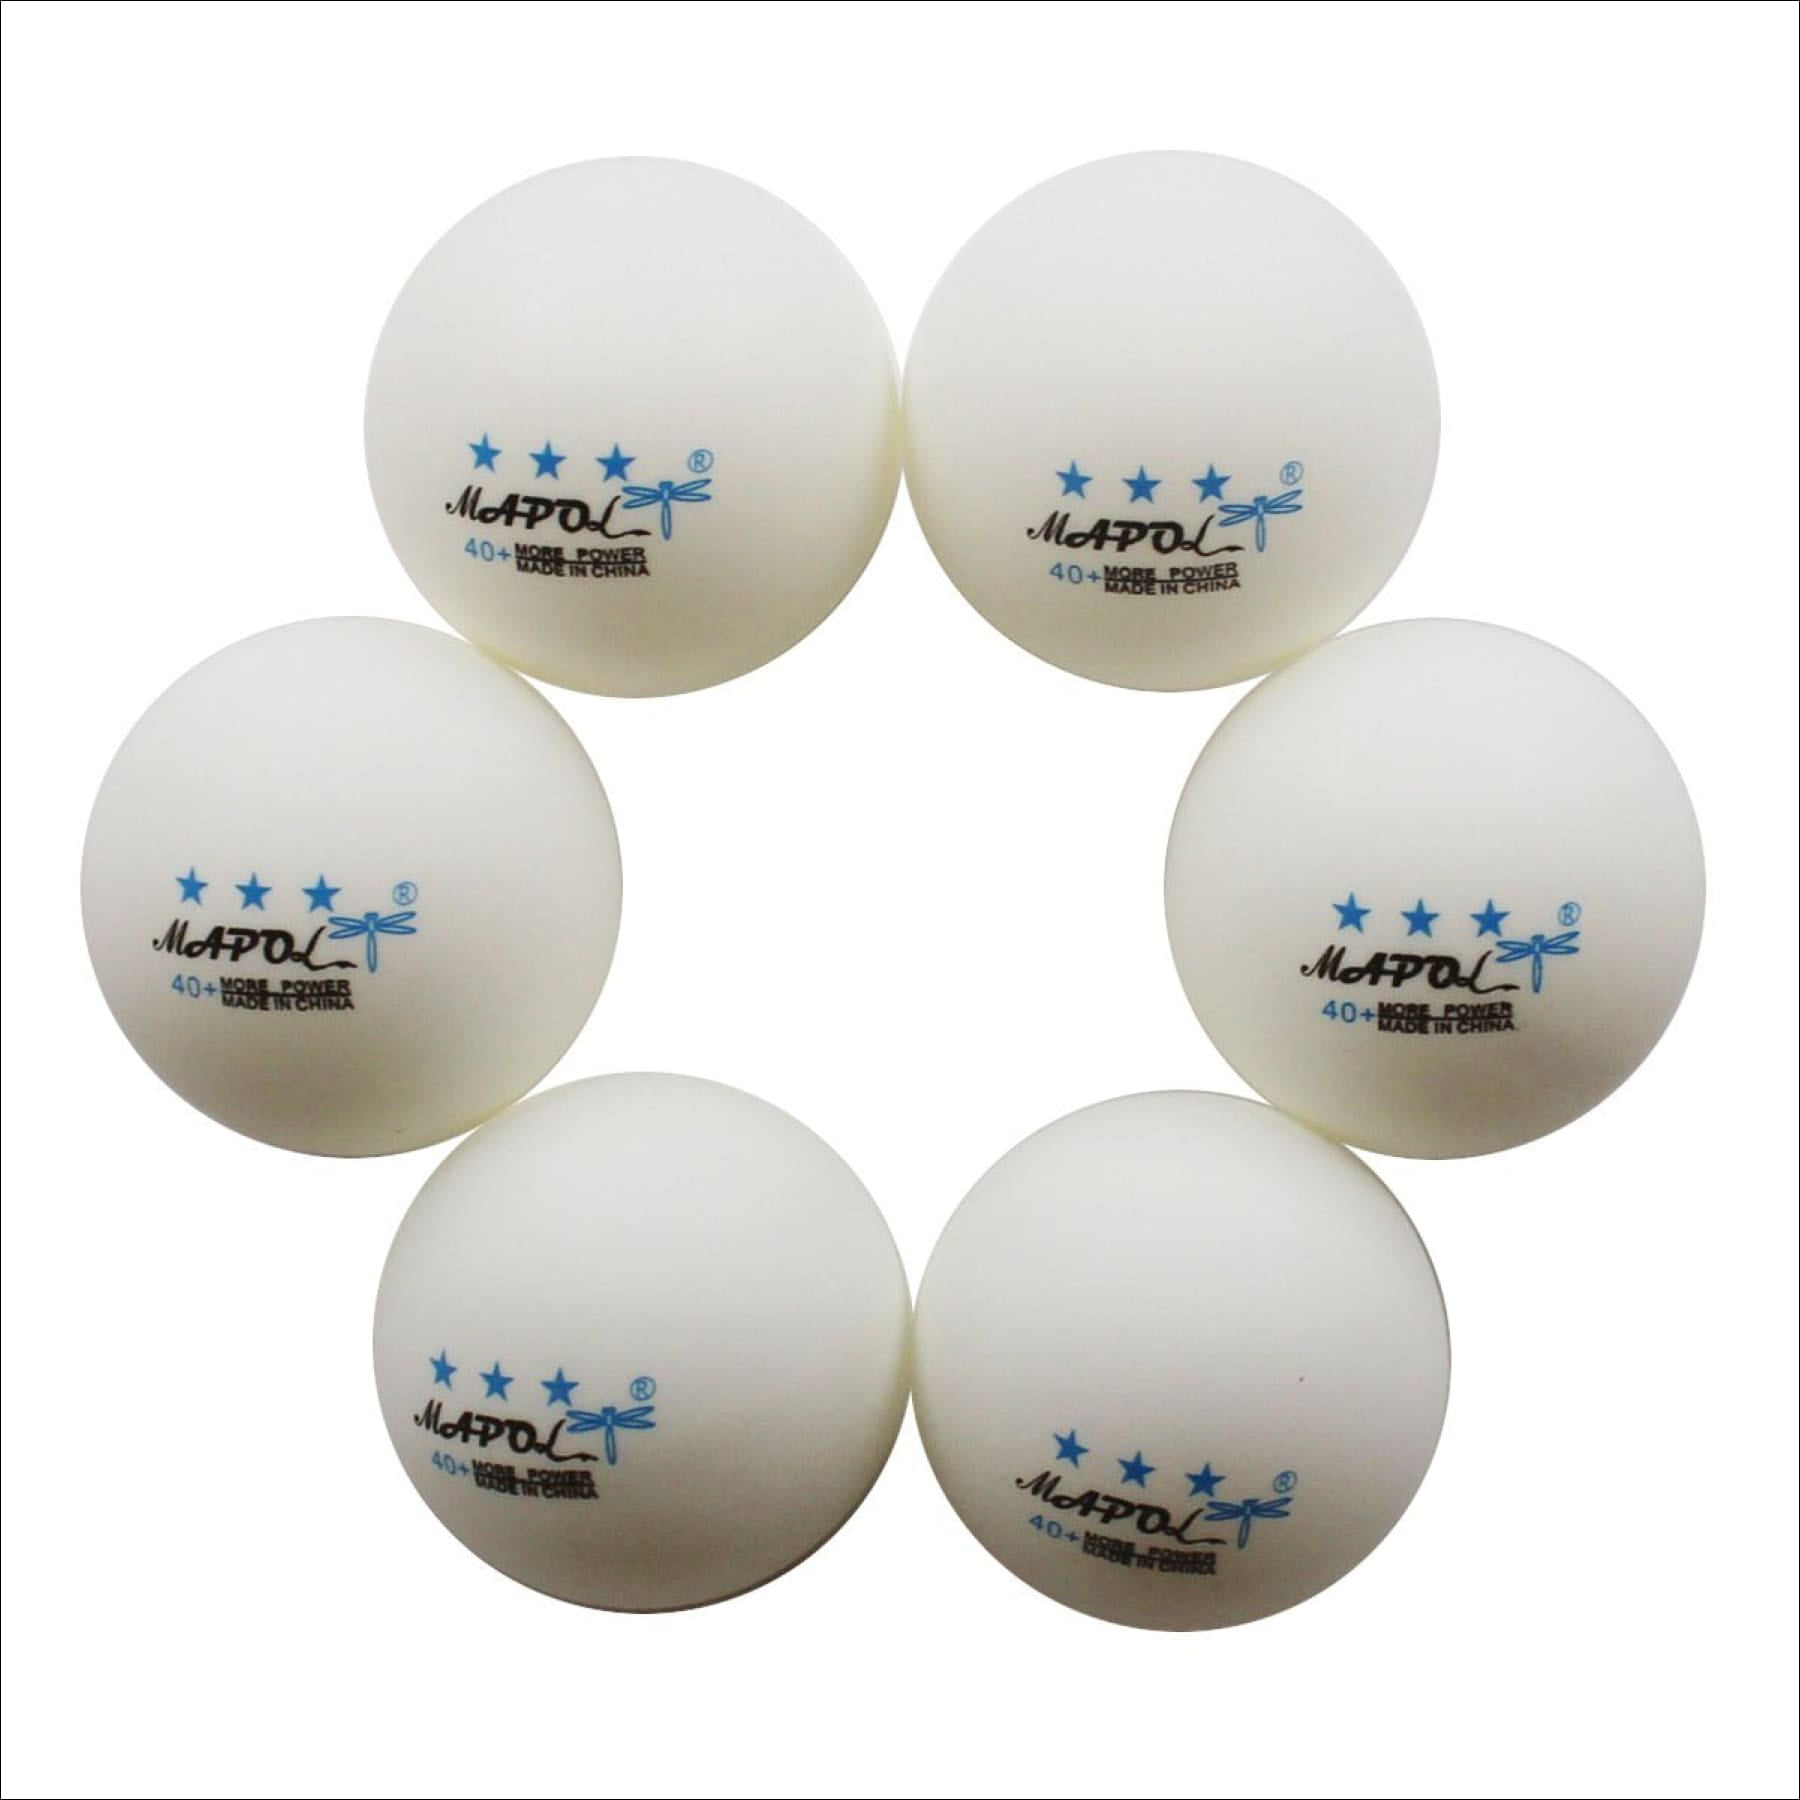 50 Count for sale online MAPOL MP-004 Table Tennis Balls